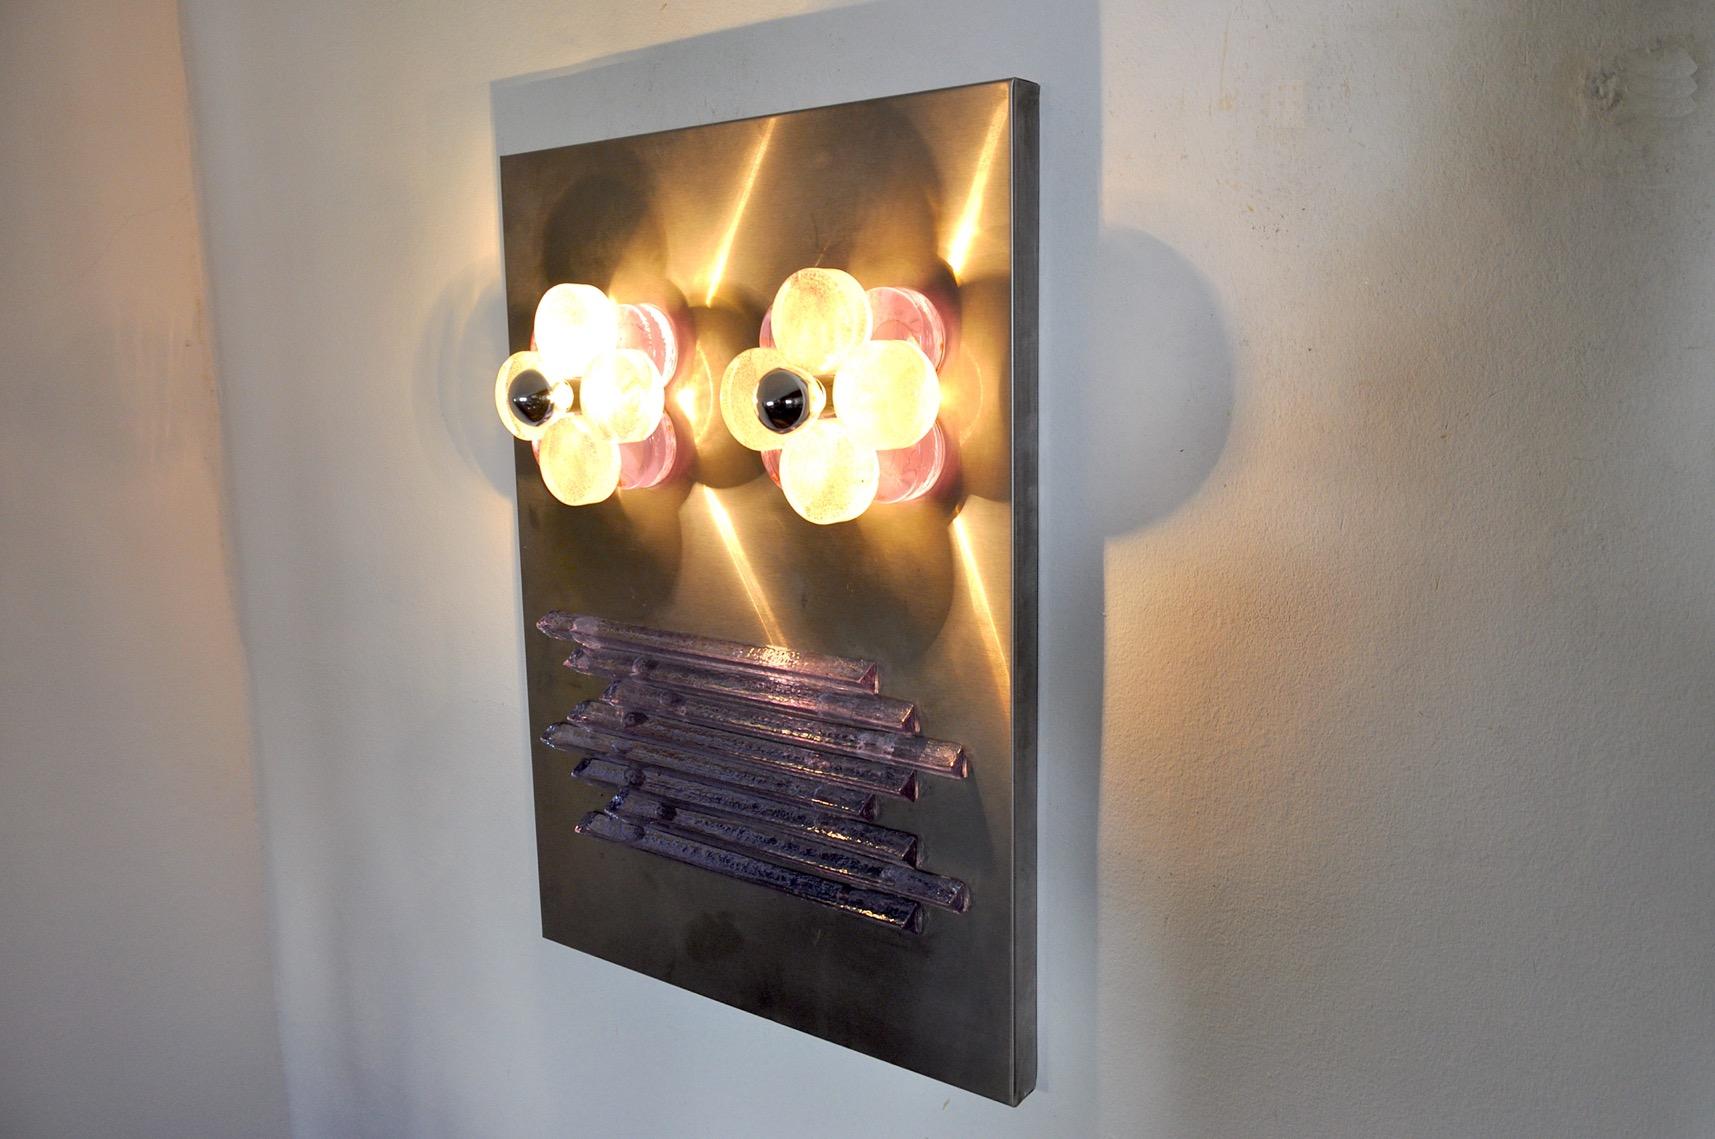 Rare xxl wall lamp by Albano Poli for Poliarte.
Designed and produced in Italy in the 1970s.
This panel is to be appreciated as a work of art, it is composed of purple glass bars mounted symmetrically and two points of light mounted on two round